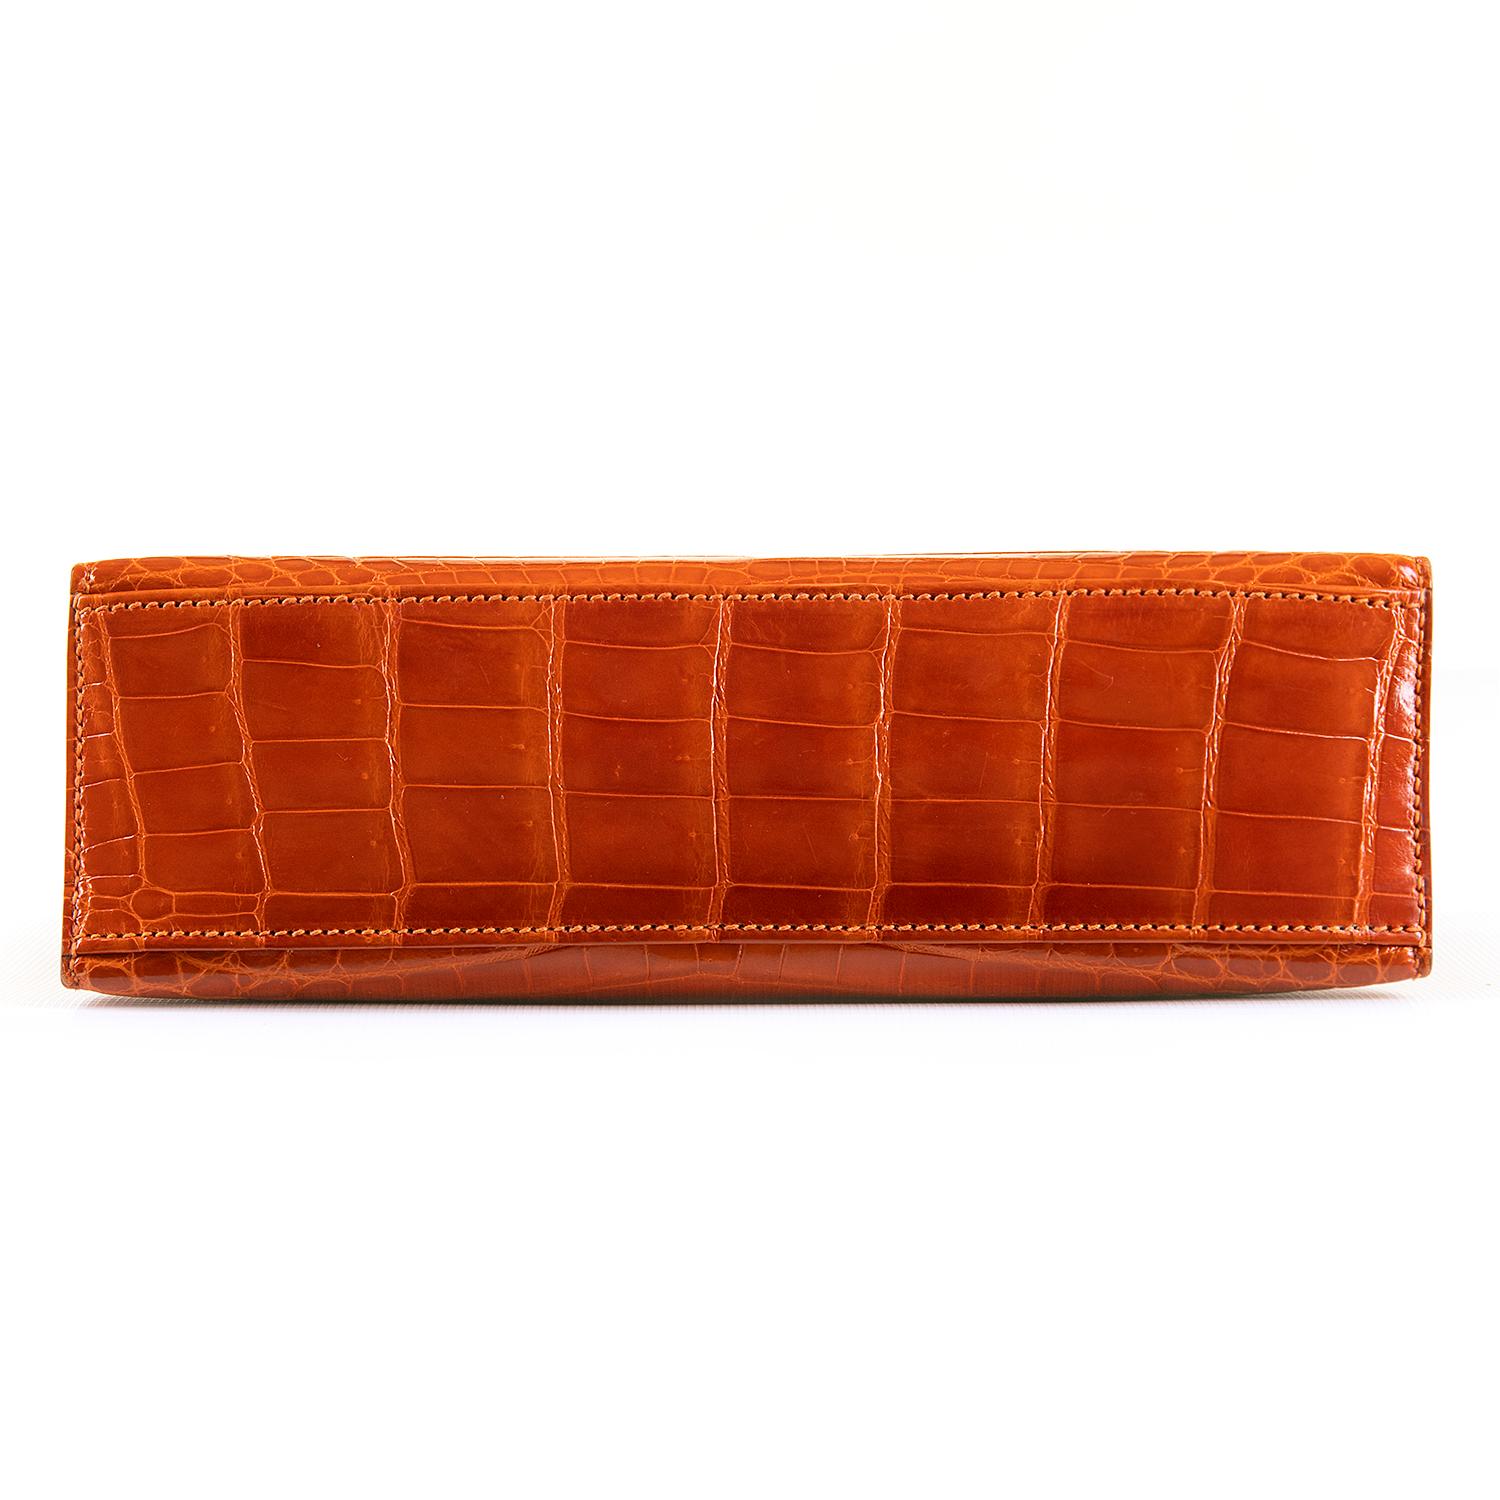 In absolutely Pristine, 'As New' Condition, this rare Hermes Mini Kelly Clutch Bag is finished in beautiful Orange Nile Crocodile, accented with Silver Palladium Hardware.  This top of the range Hermes bag comes complete with it's original Hermes